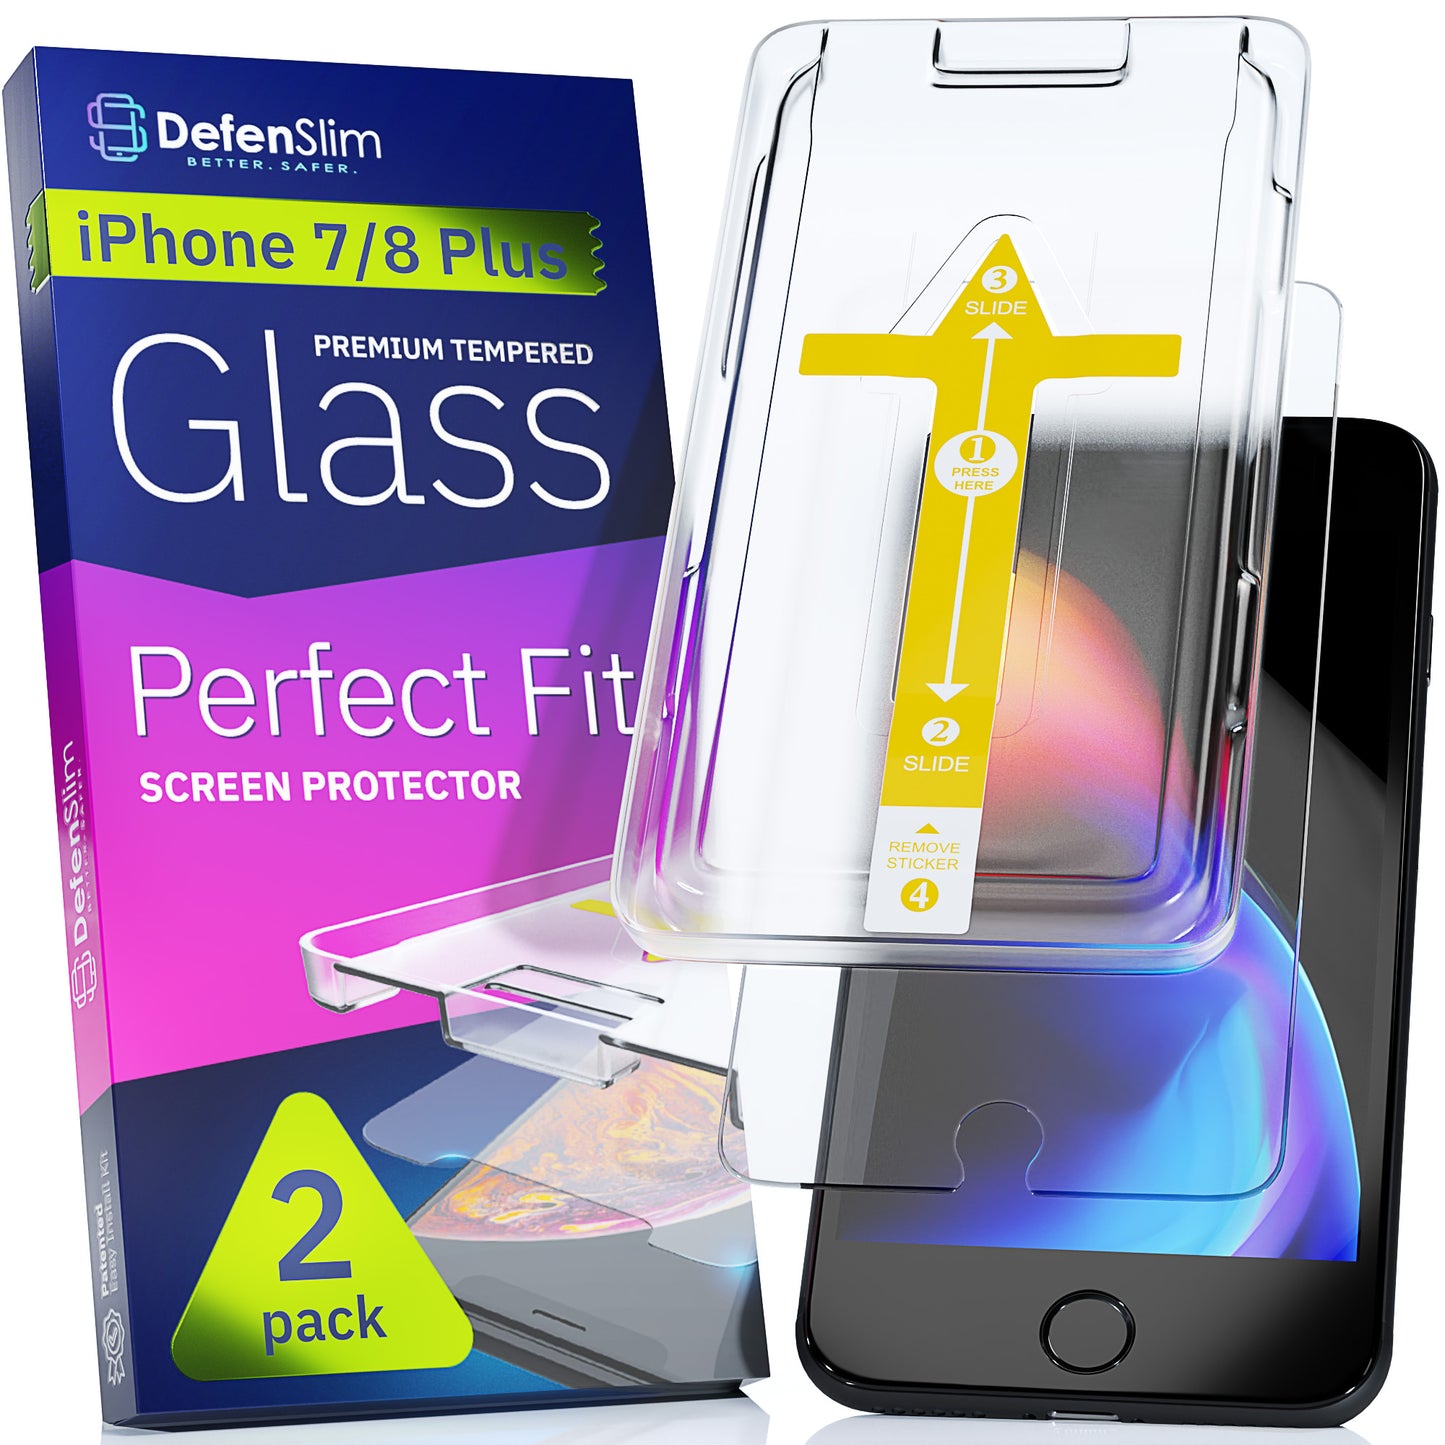 Defenslim iPhone 8/7 Plus Screen Protector [2-Pack] with Easy Auto-Align Install Kit